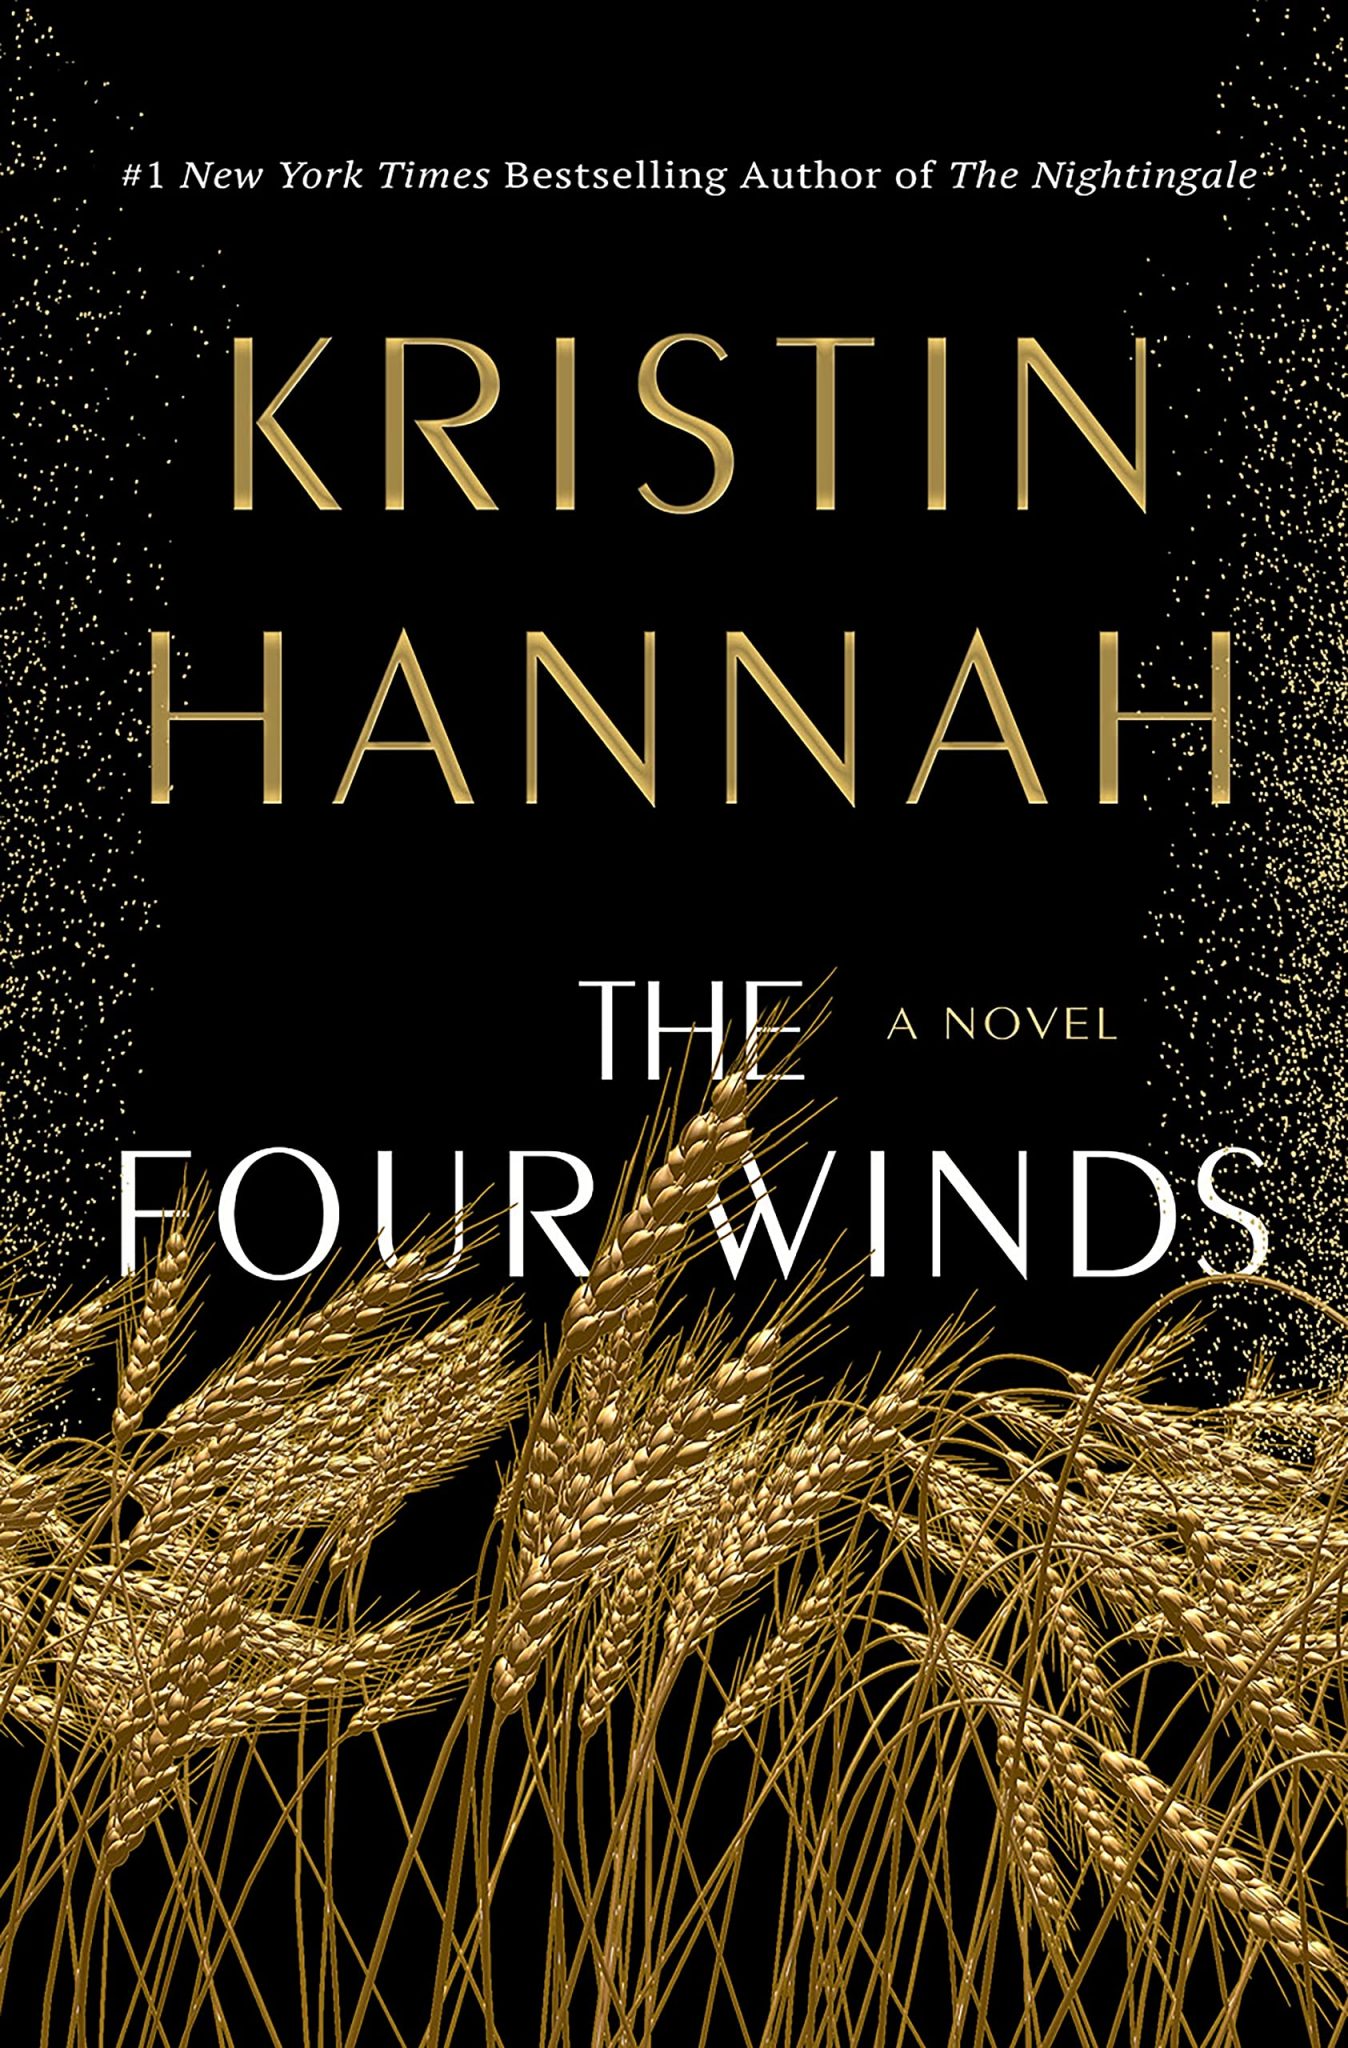 "The Four Winds" book cover